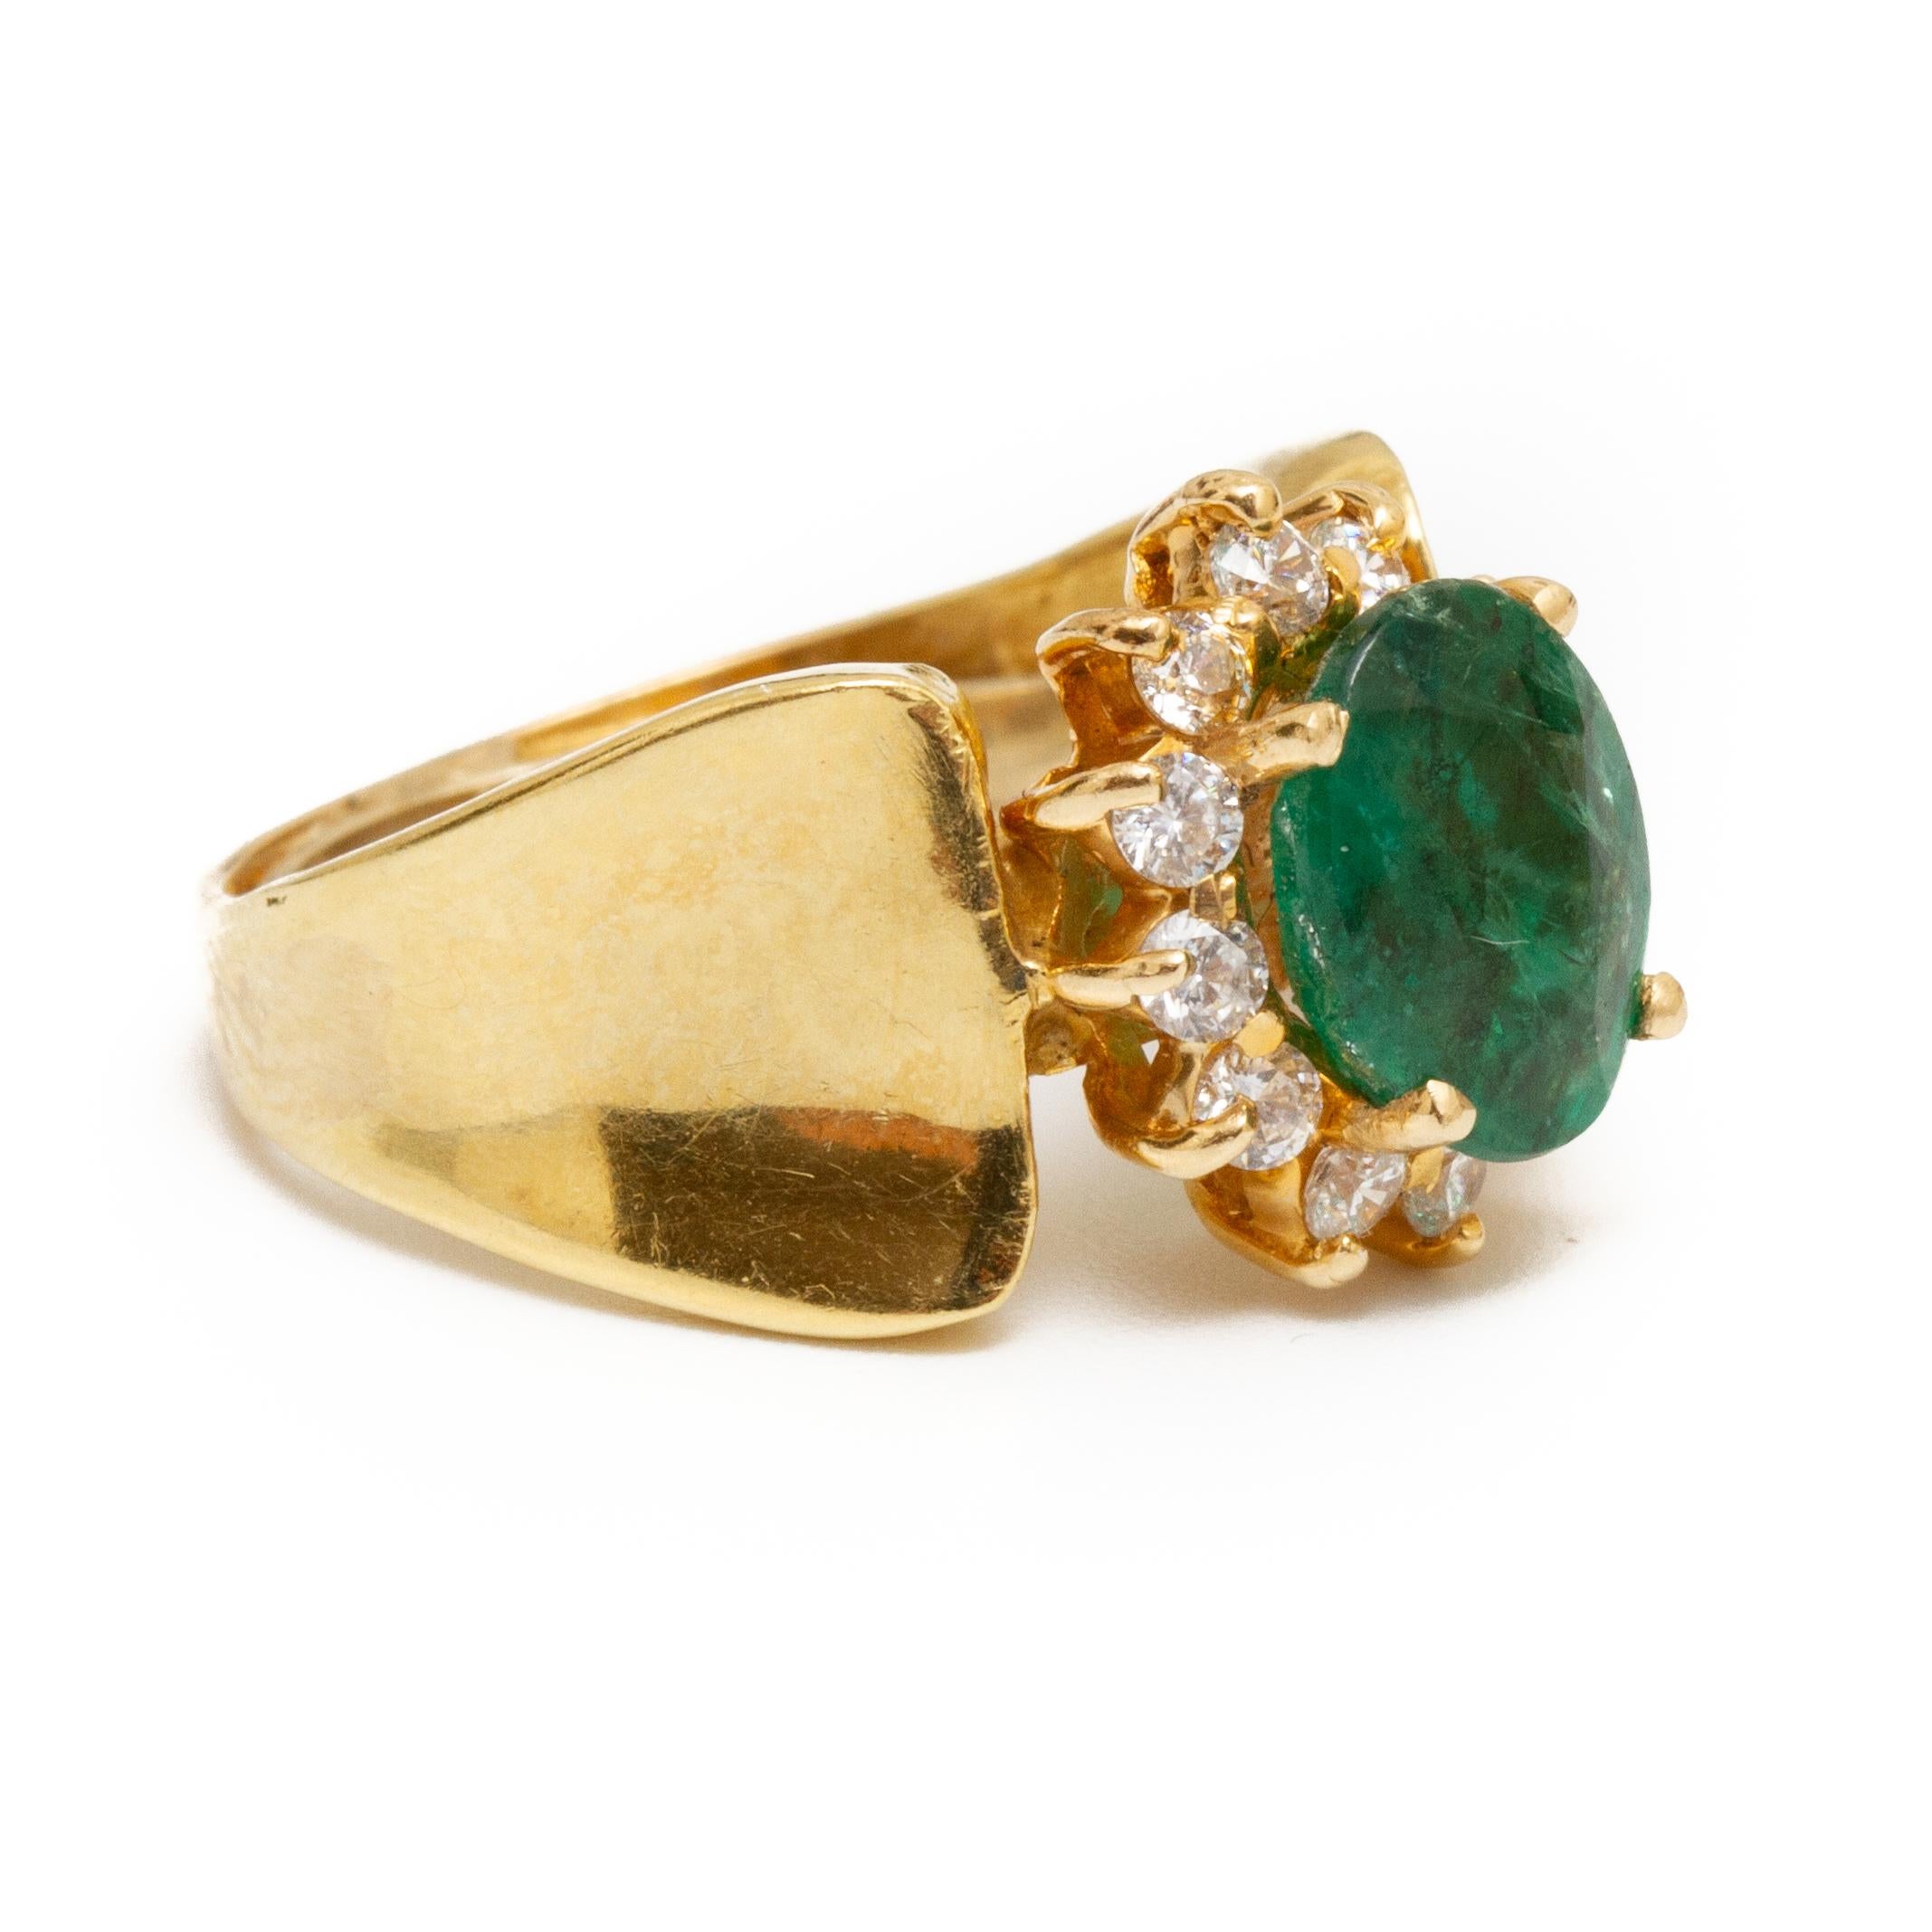 Emerald and diamond 14k gold ring size approx. 6. The ring has a stabilizer attached. Weighs approx. 3.6 dwt From the Broussard estate noted jewelry collection Park Avenue New York